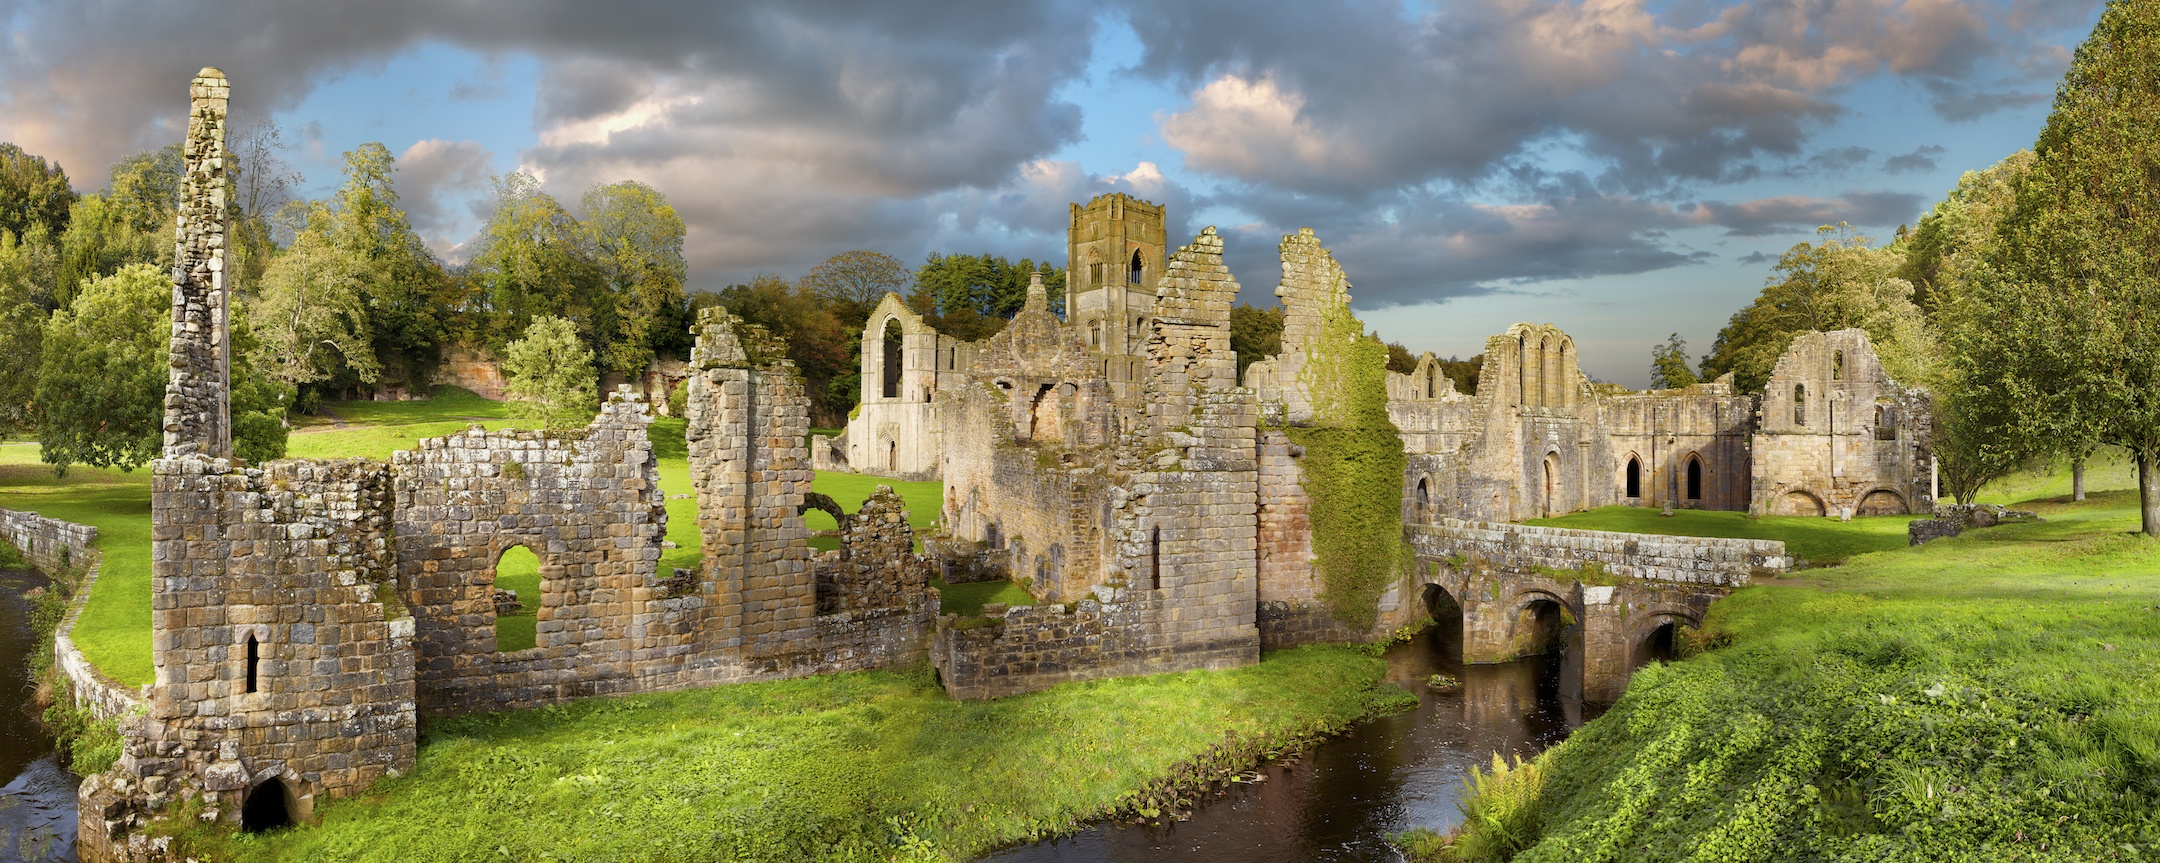 Amazing Fountains Abbey Pictures & Backgrounds